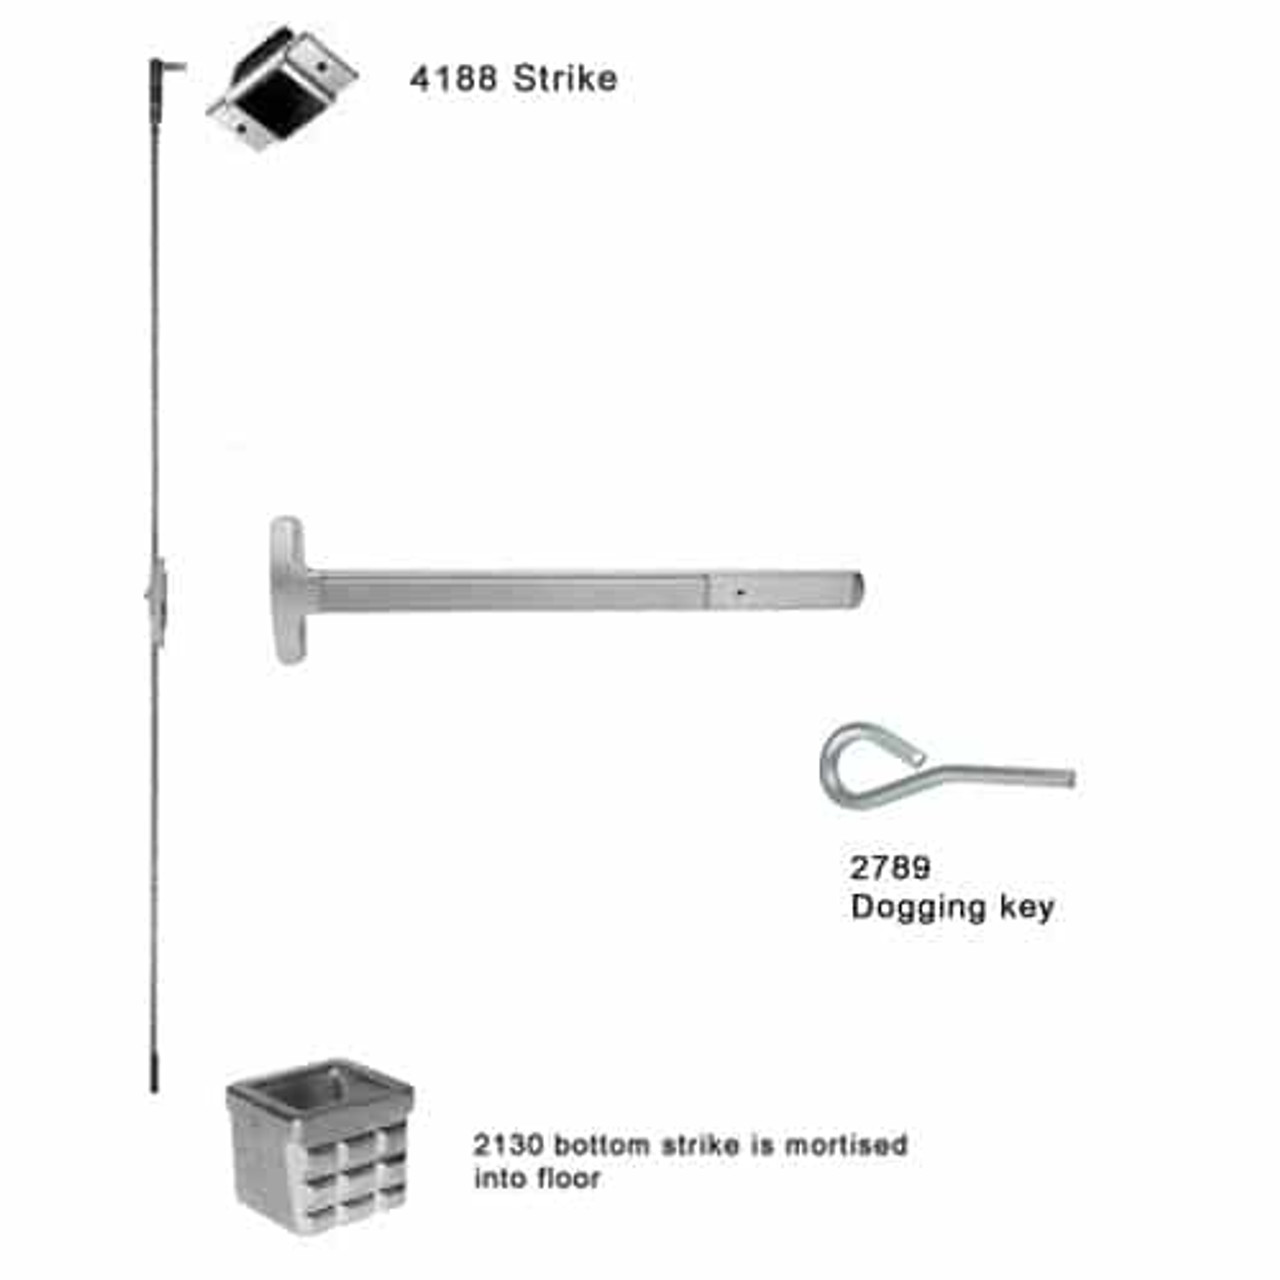 24-C-NL-US28-4-RHR Falcon 24 Series Concealed Vertical Rod Device with 718NL Delta Night Latch Trim in Anodized Aluminum